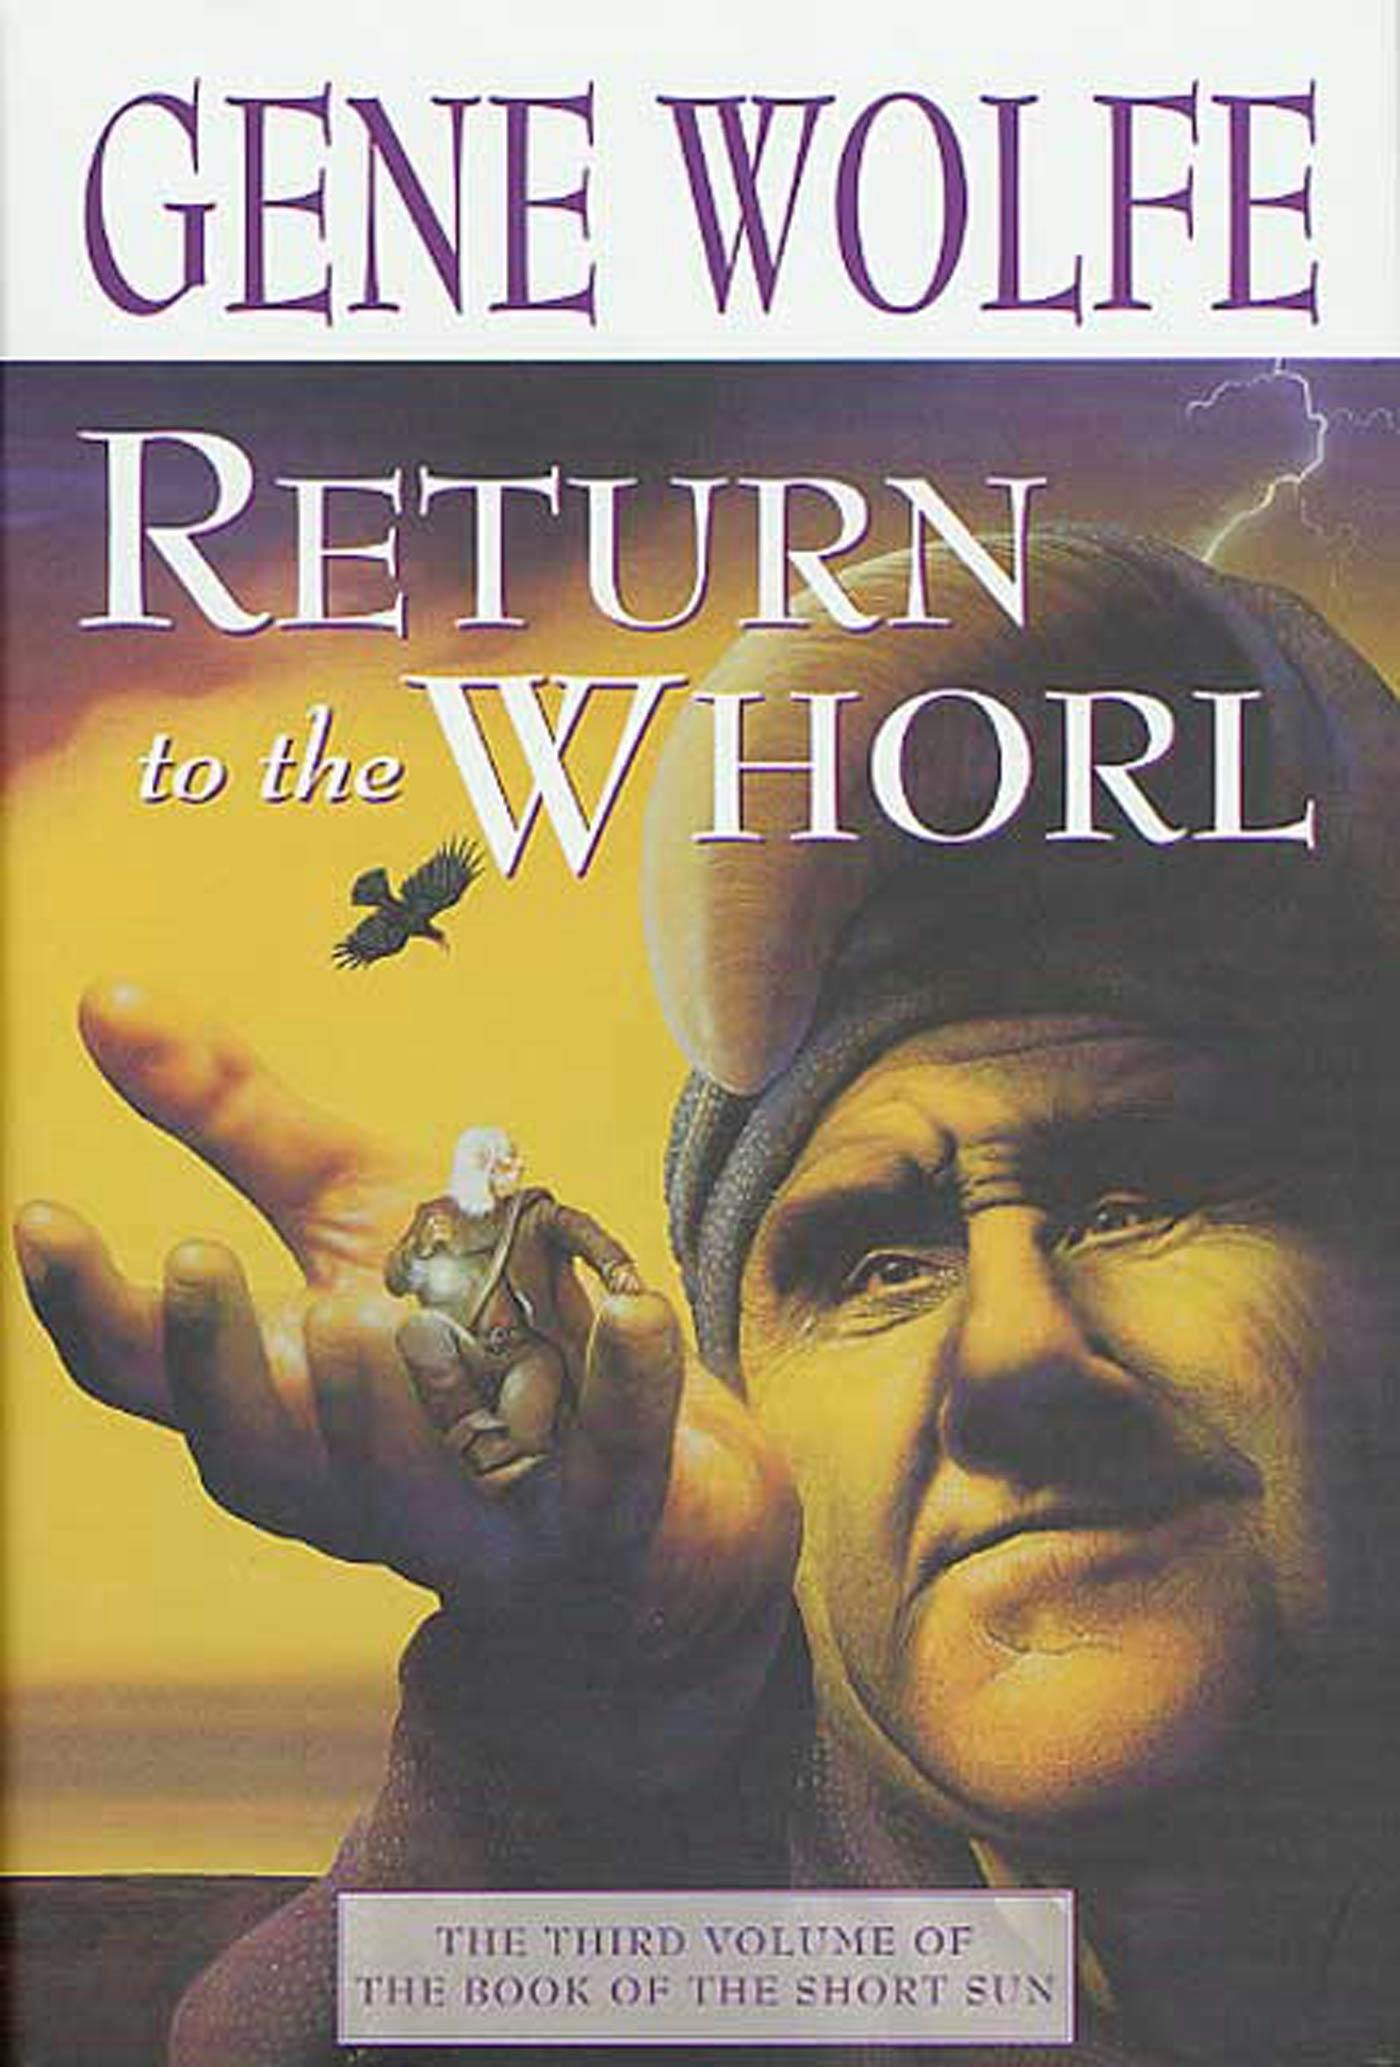 Cover for the book titled as: Return to the Whorl